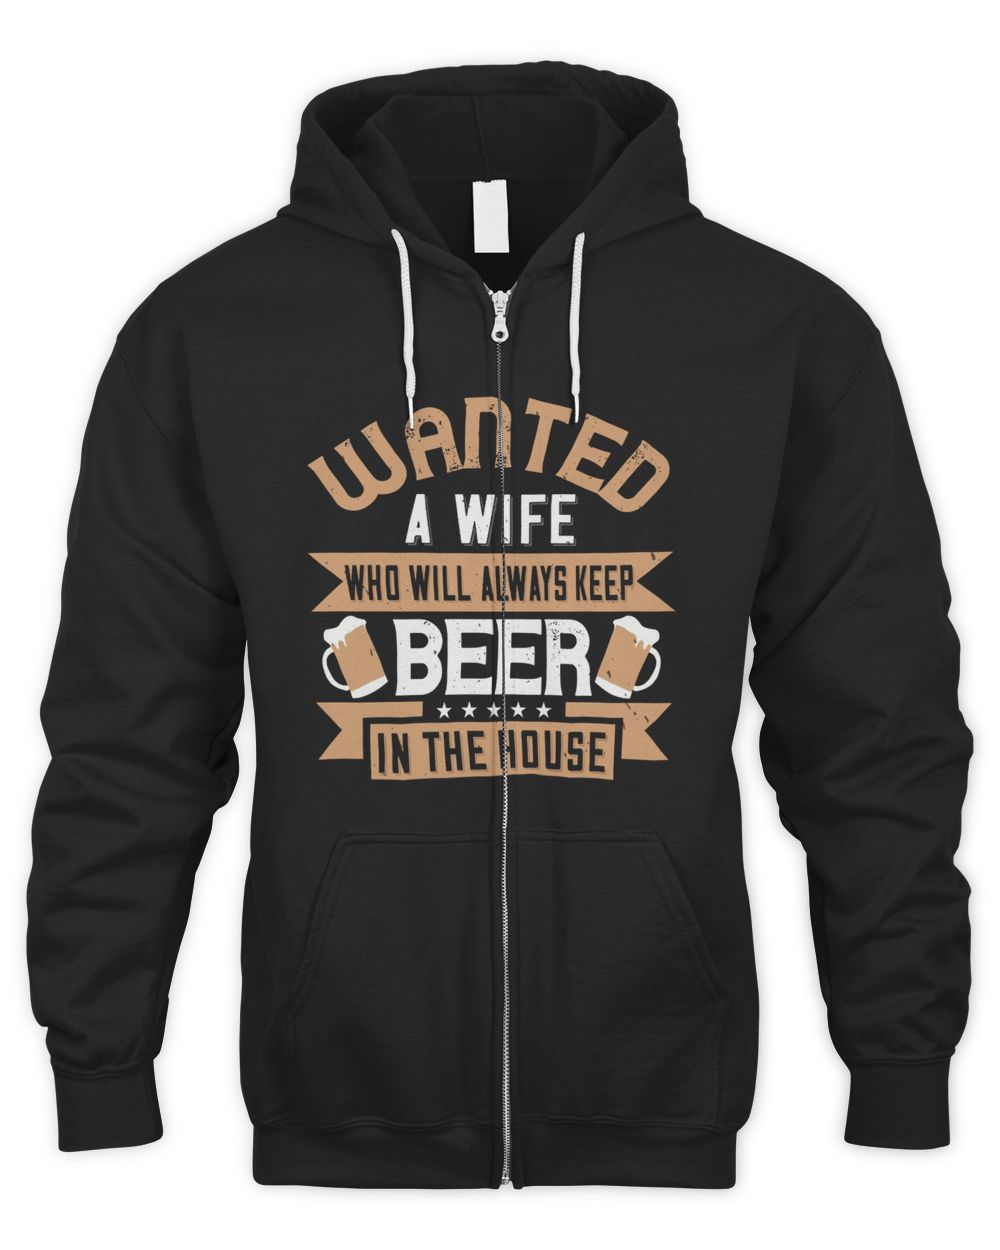 Wanted A Wife Who Will Always Keep Beer In The House Beer Shirt For Beer Lover With Free Shipping, Great Gift For Fathers Day Men's Zip Hoodie black 